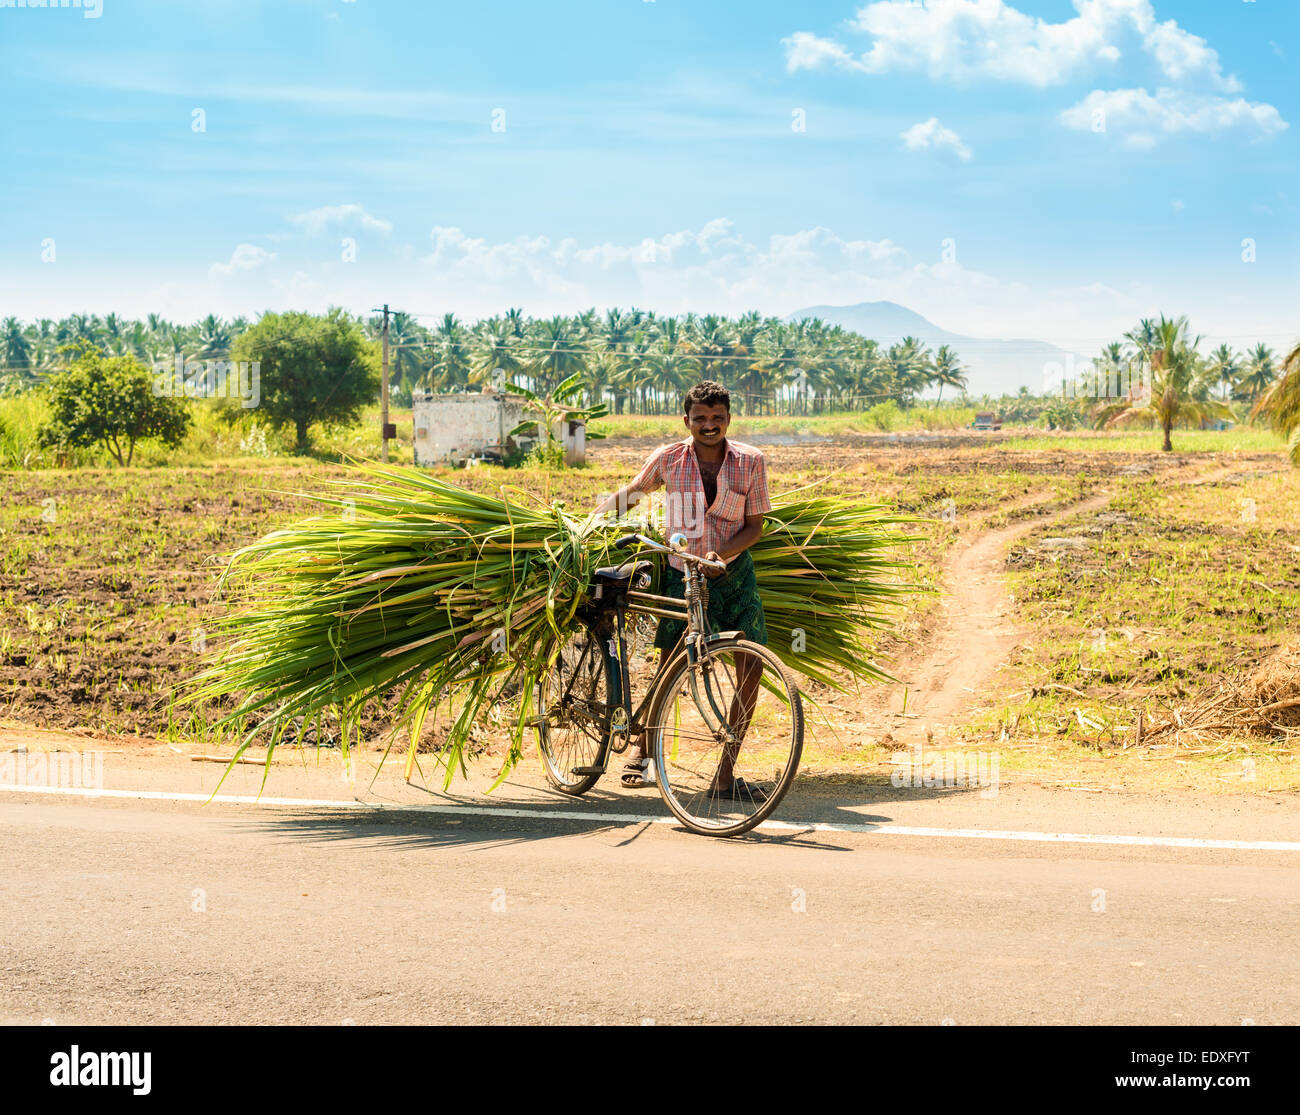 MADURAI, INDIA - FEBRUARY 17: An unidentified man on a rural road on a bicycle carries cane leaves. India, Tamil Nadu, near Madu Stock Photo